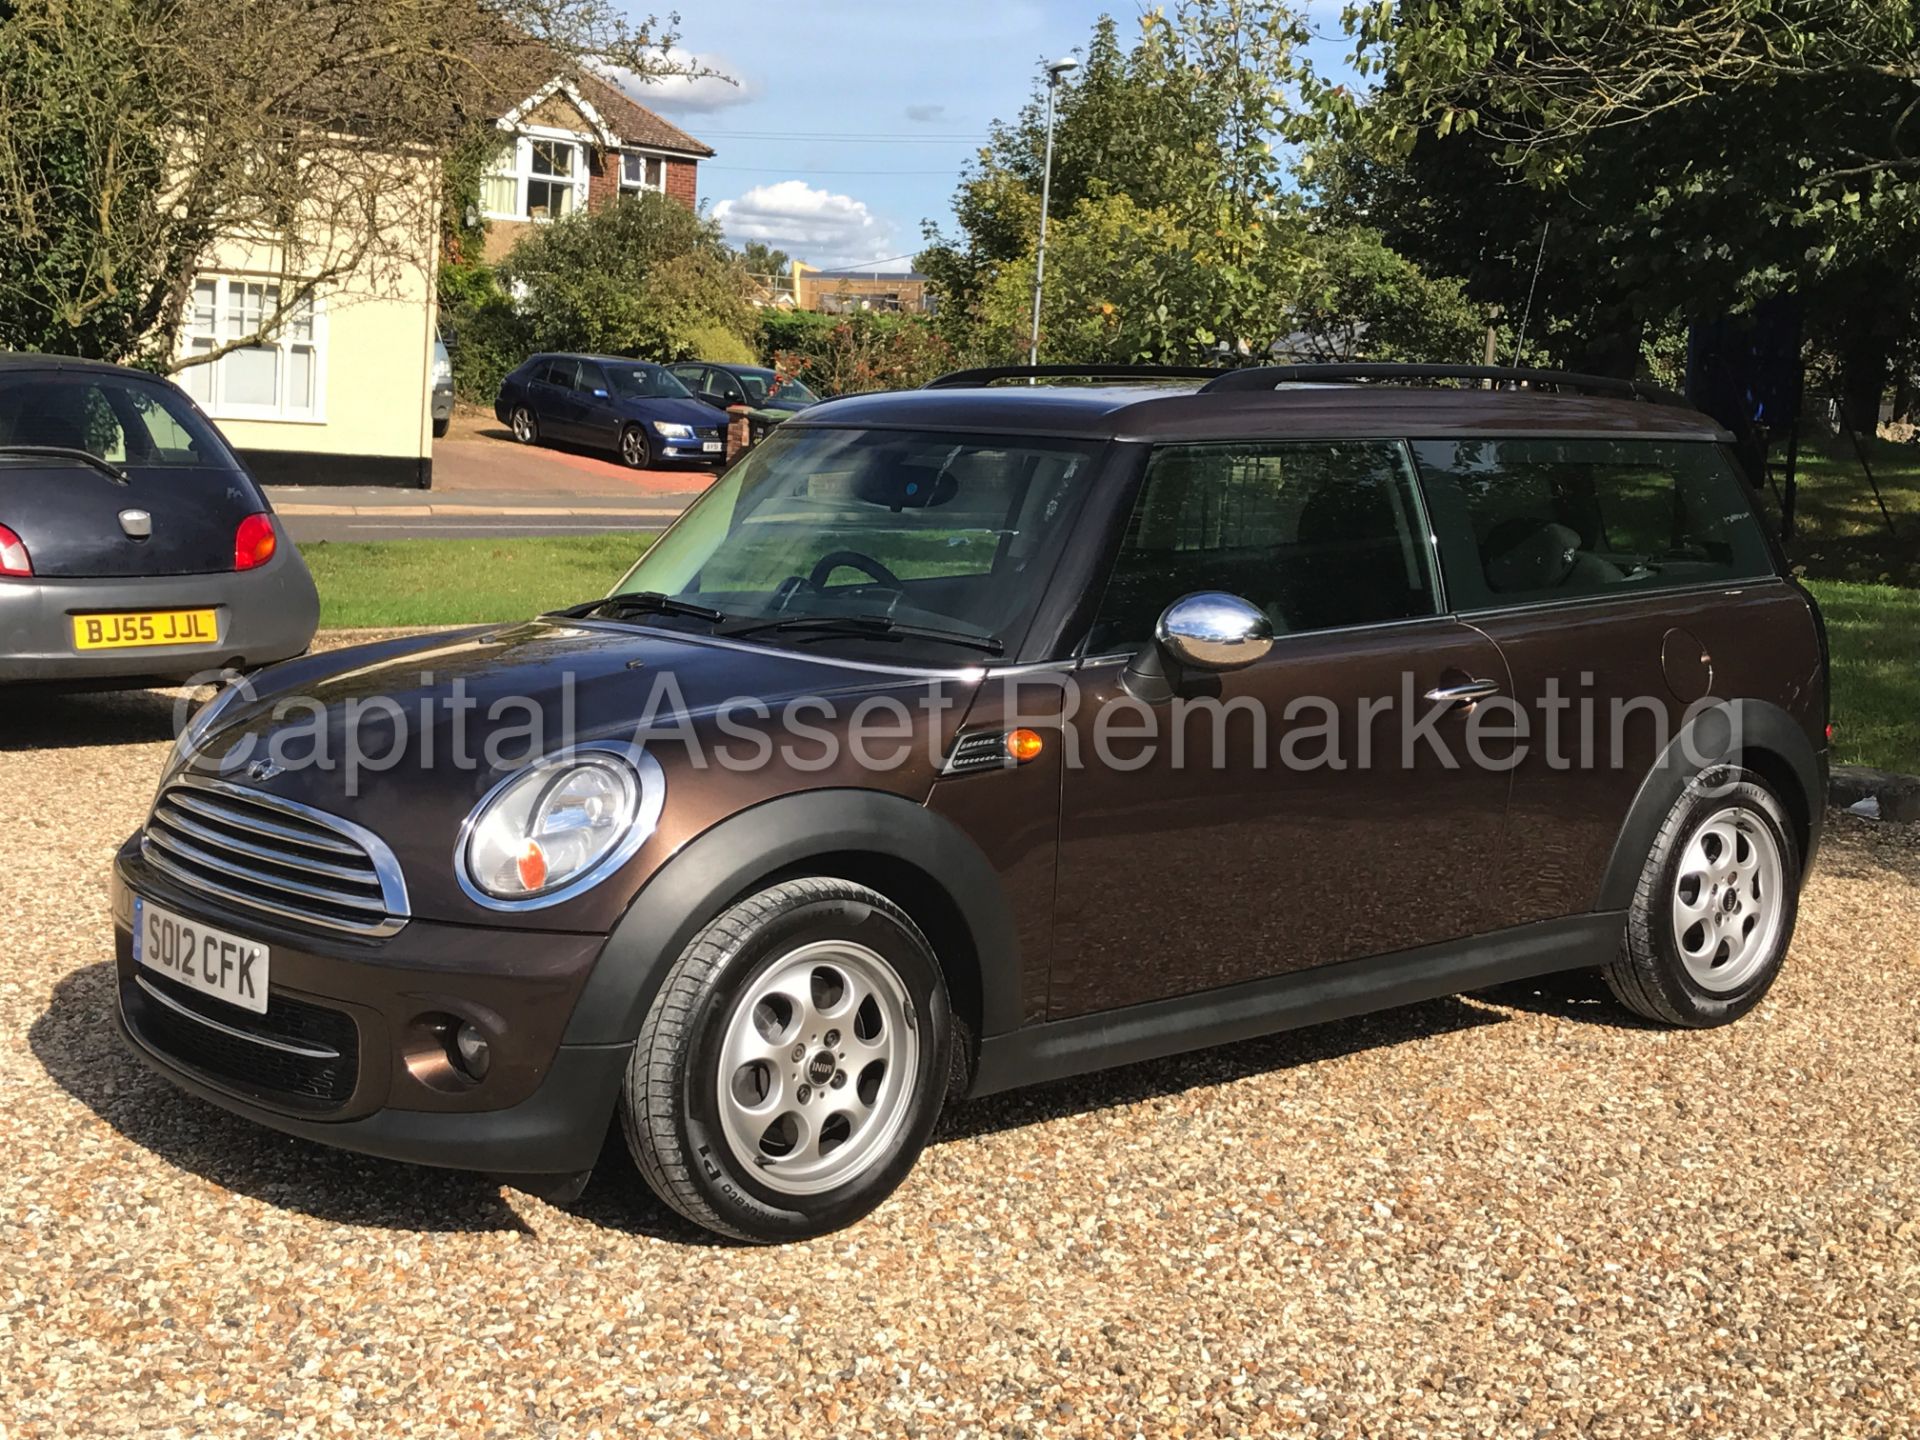 (ON SALE) MINI CLUBMAN "COOPER D" HOT CHOCOLATE EDITION (12 REG) AIR CON - ELEC PACK - COLOUR CODED